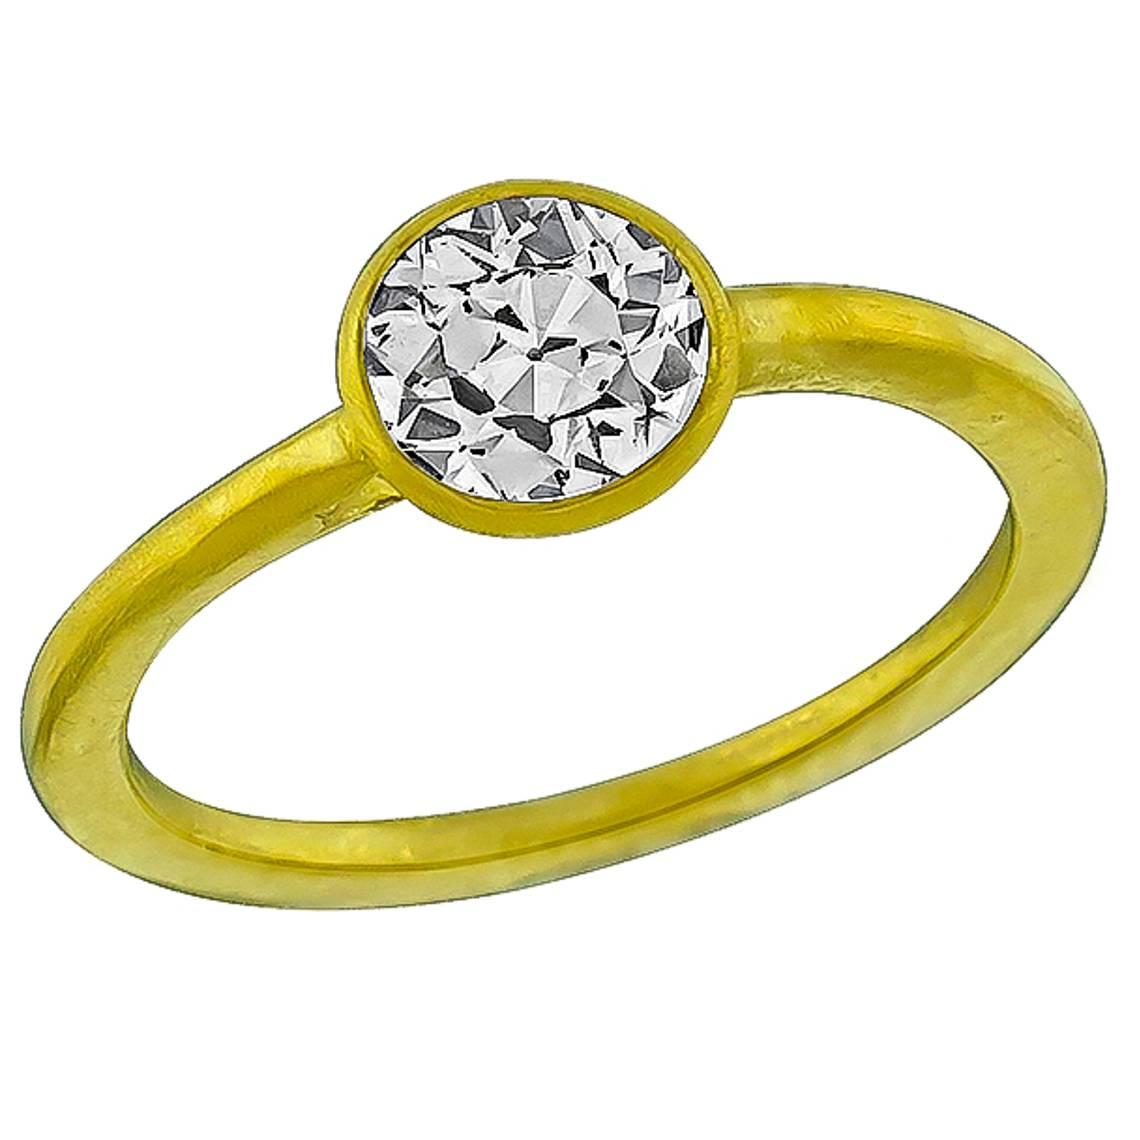 0.66 Carat Diamond gold Solitaire Engagement Ring